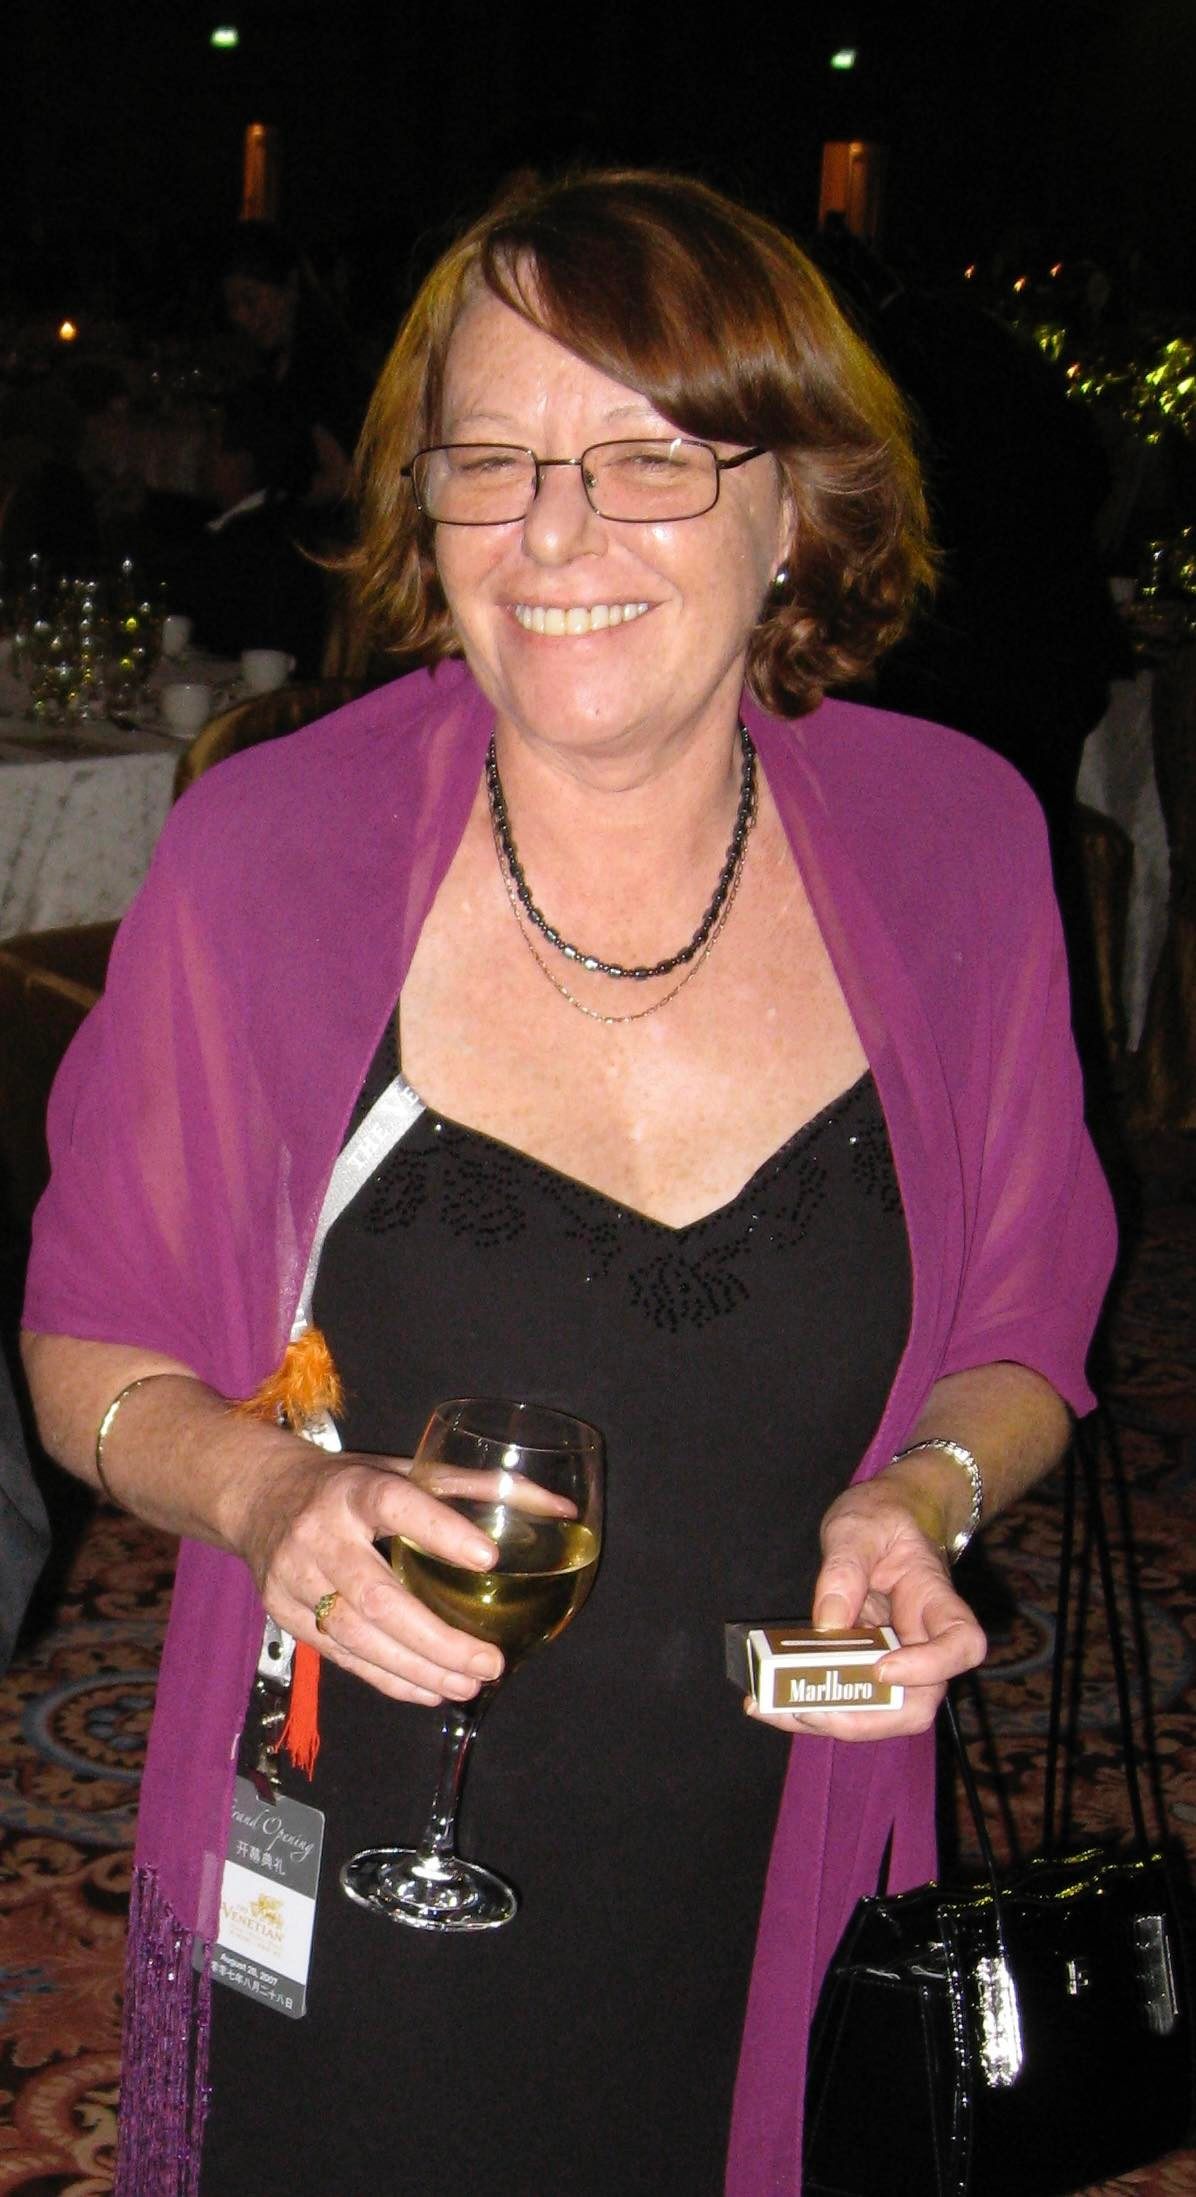 Concert promoter Colleen Ironside, who died at the age of 69 at her home in Hua Hin, Thailand. Photo: Handout